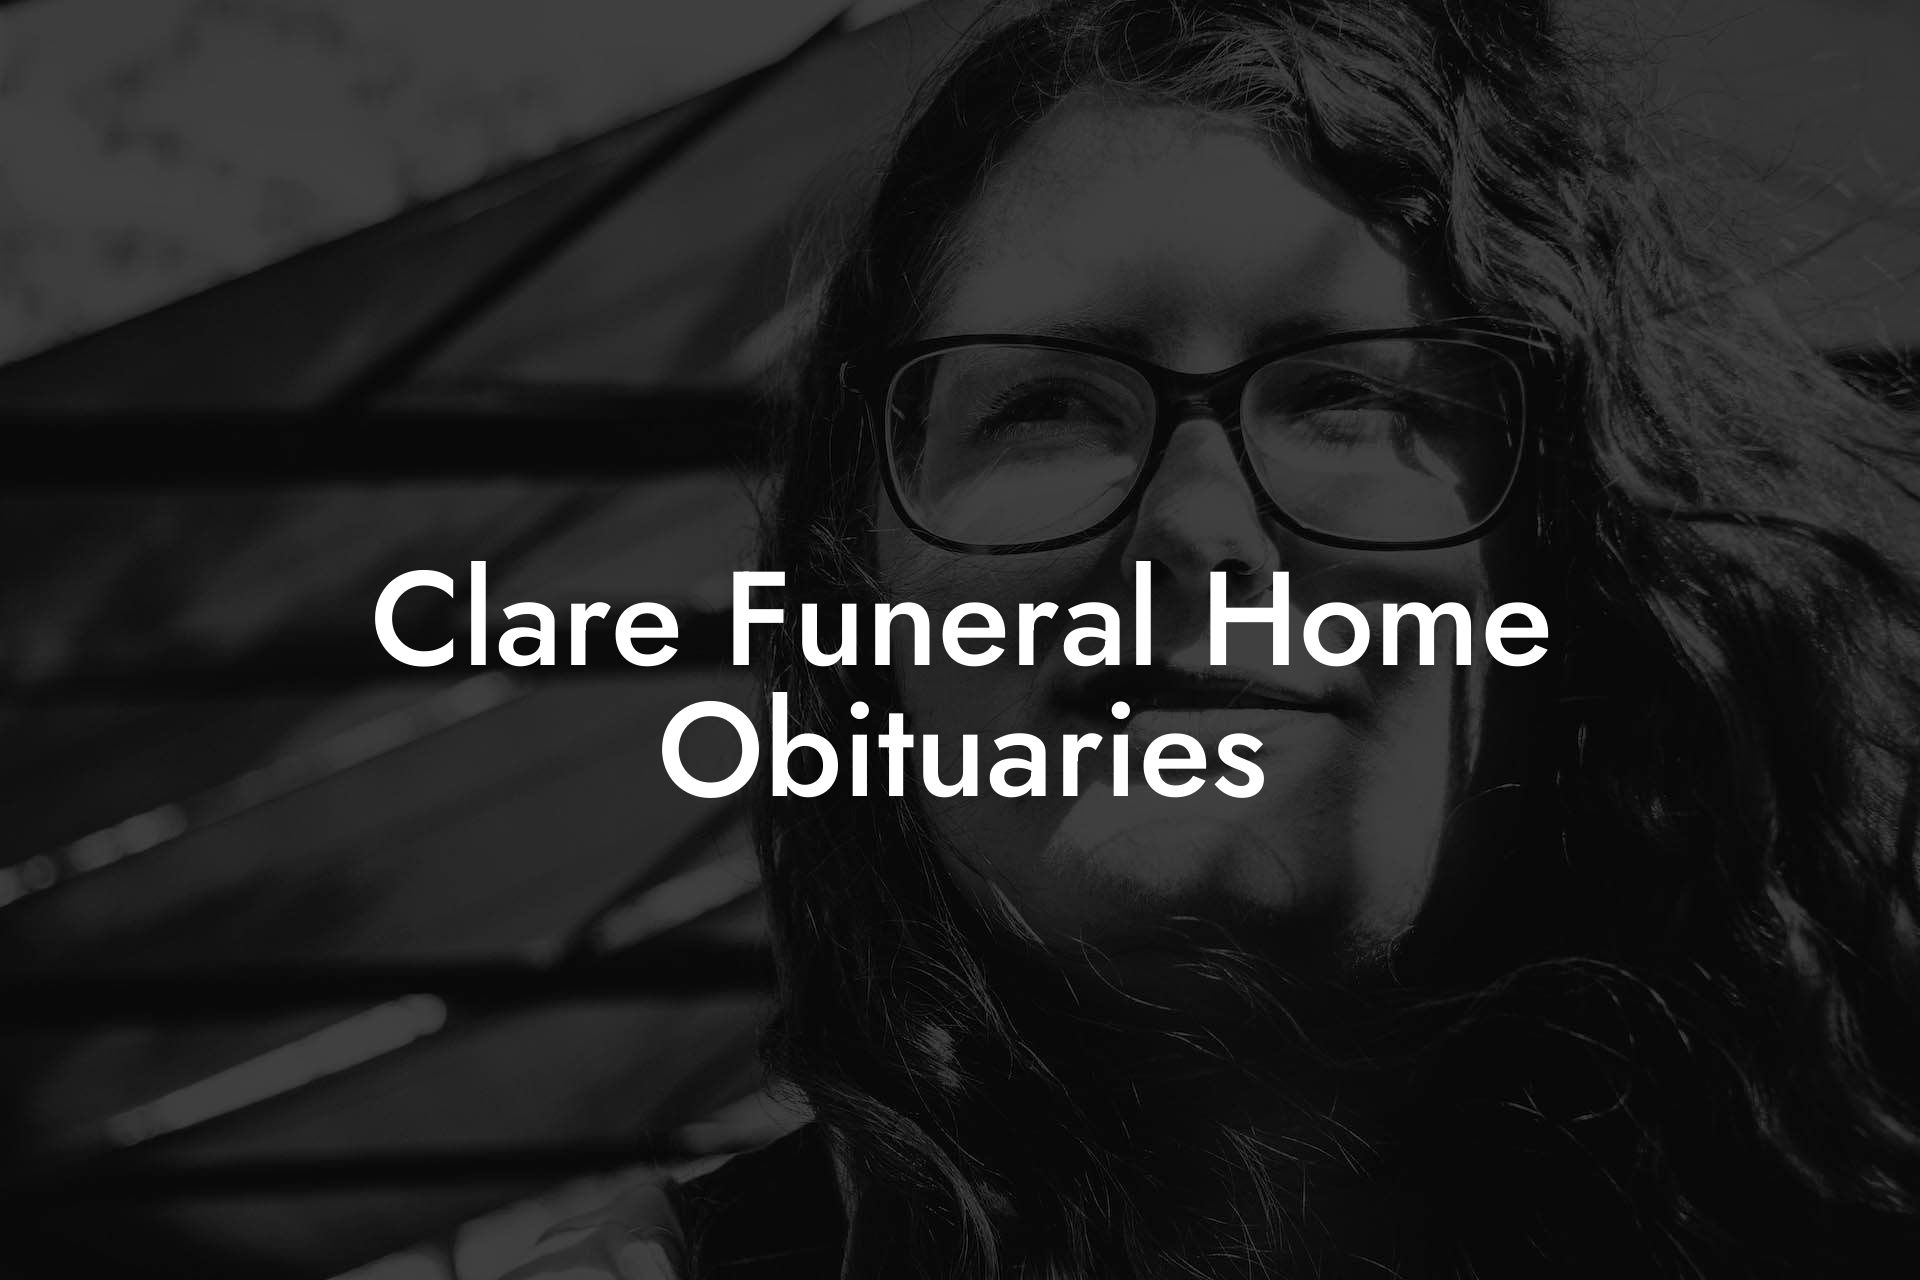 Clare Funeral Home Obituaries